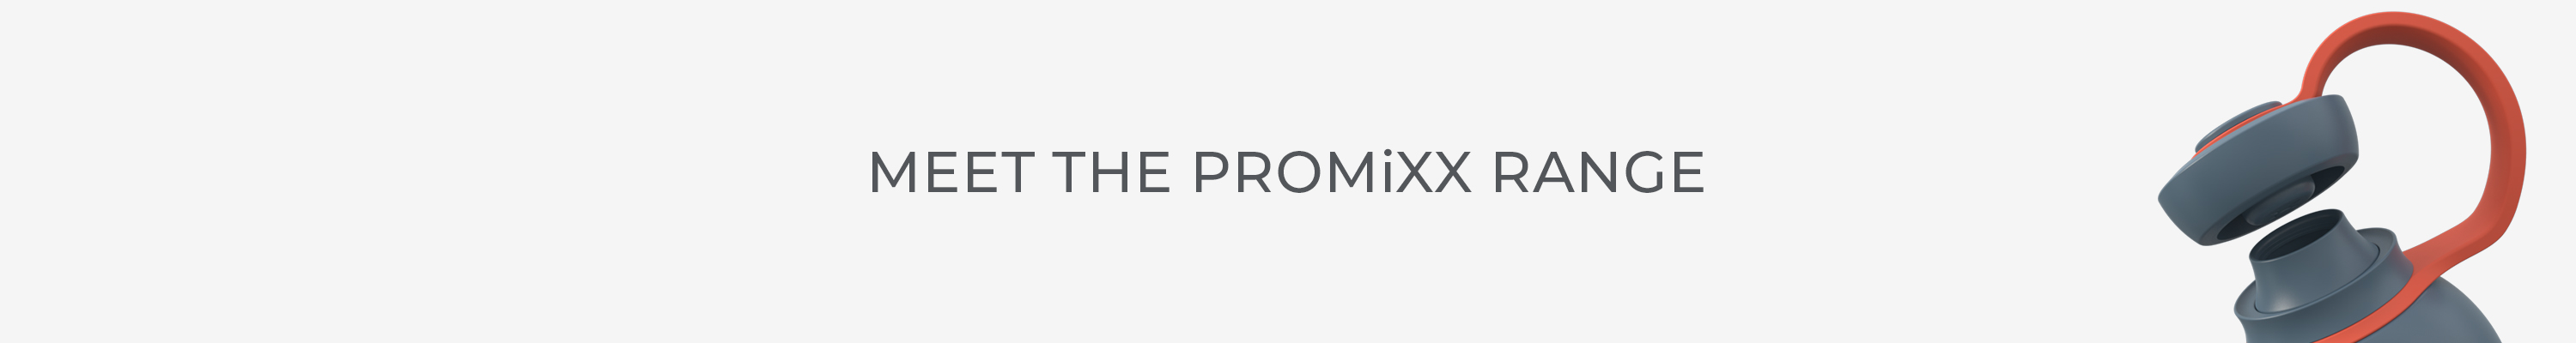 meet the PROMiXX range, text with an image of the PROMiXX FORM lid partially open